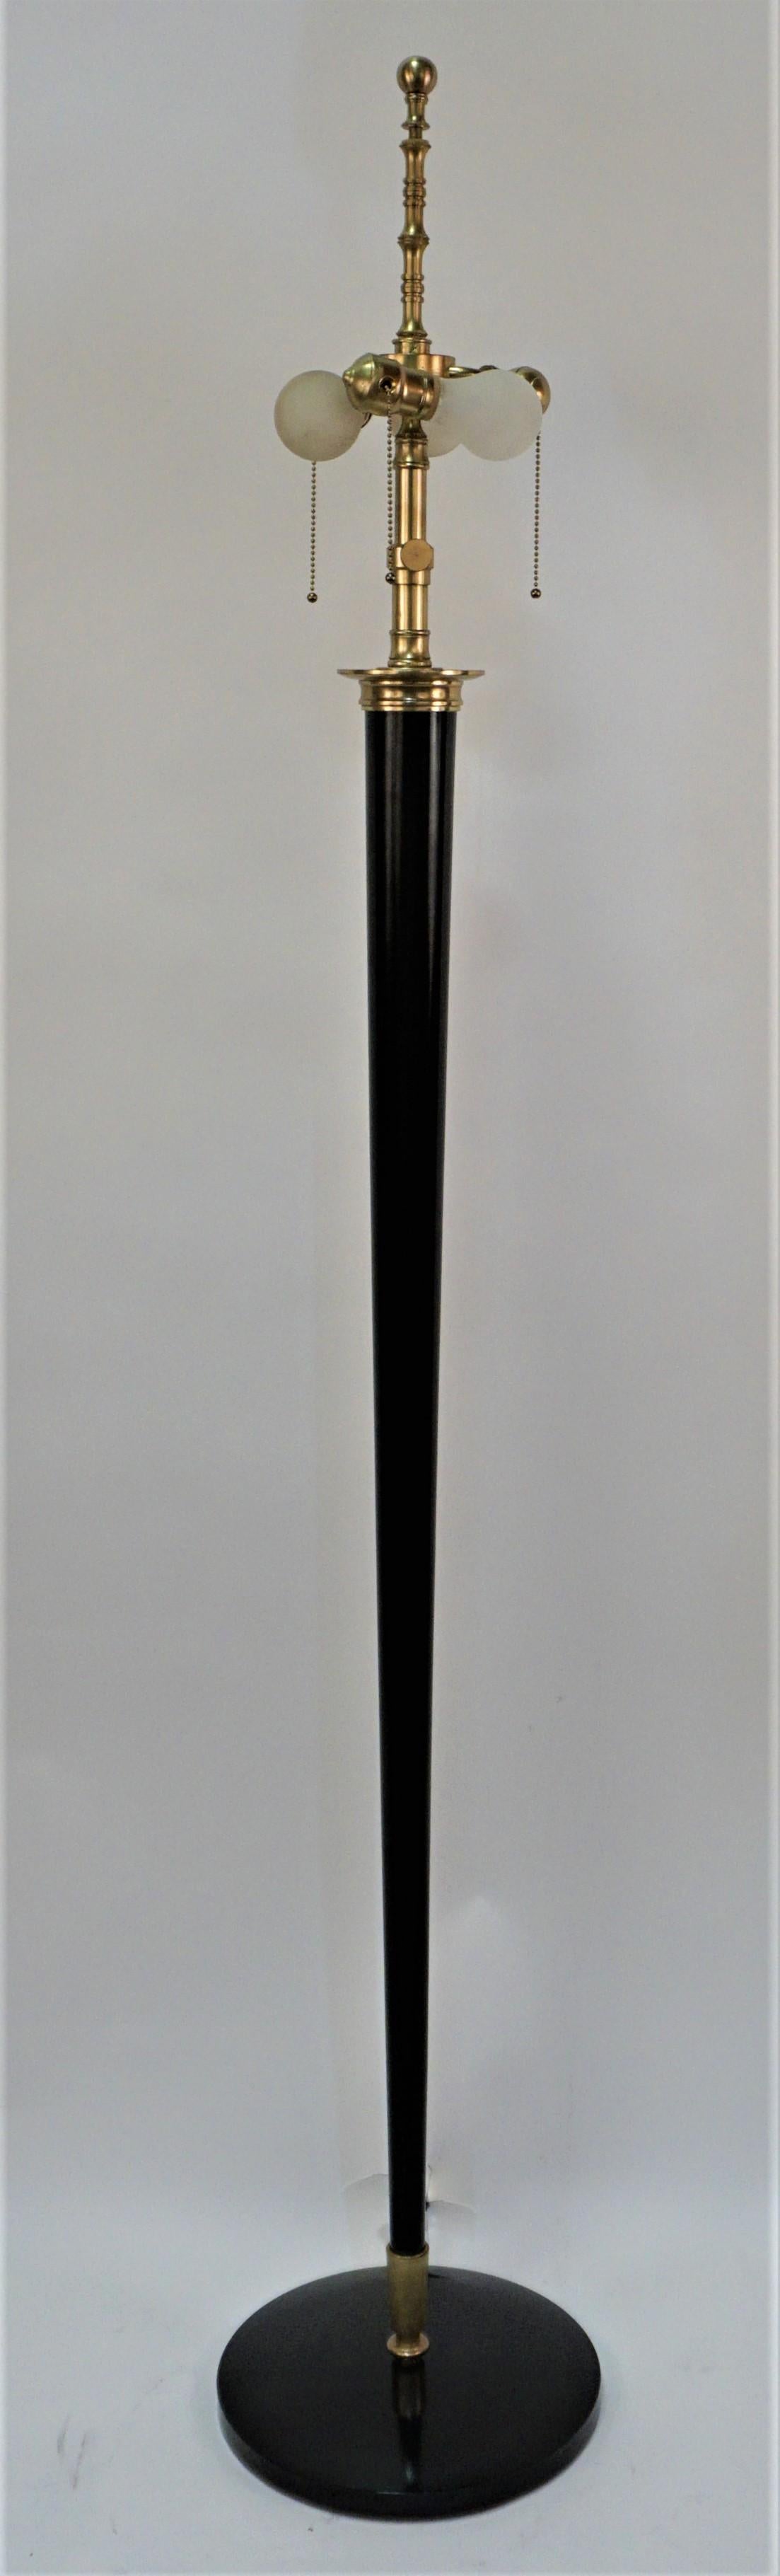 Simple but elegant bronze and lacquer on bronze 1920's floor lamp.
Three lights pull chain Max 150watt each.